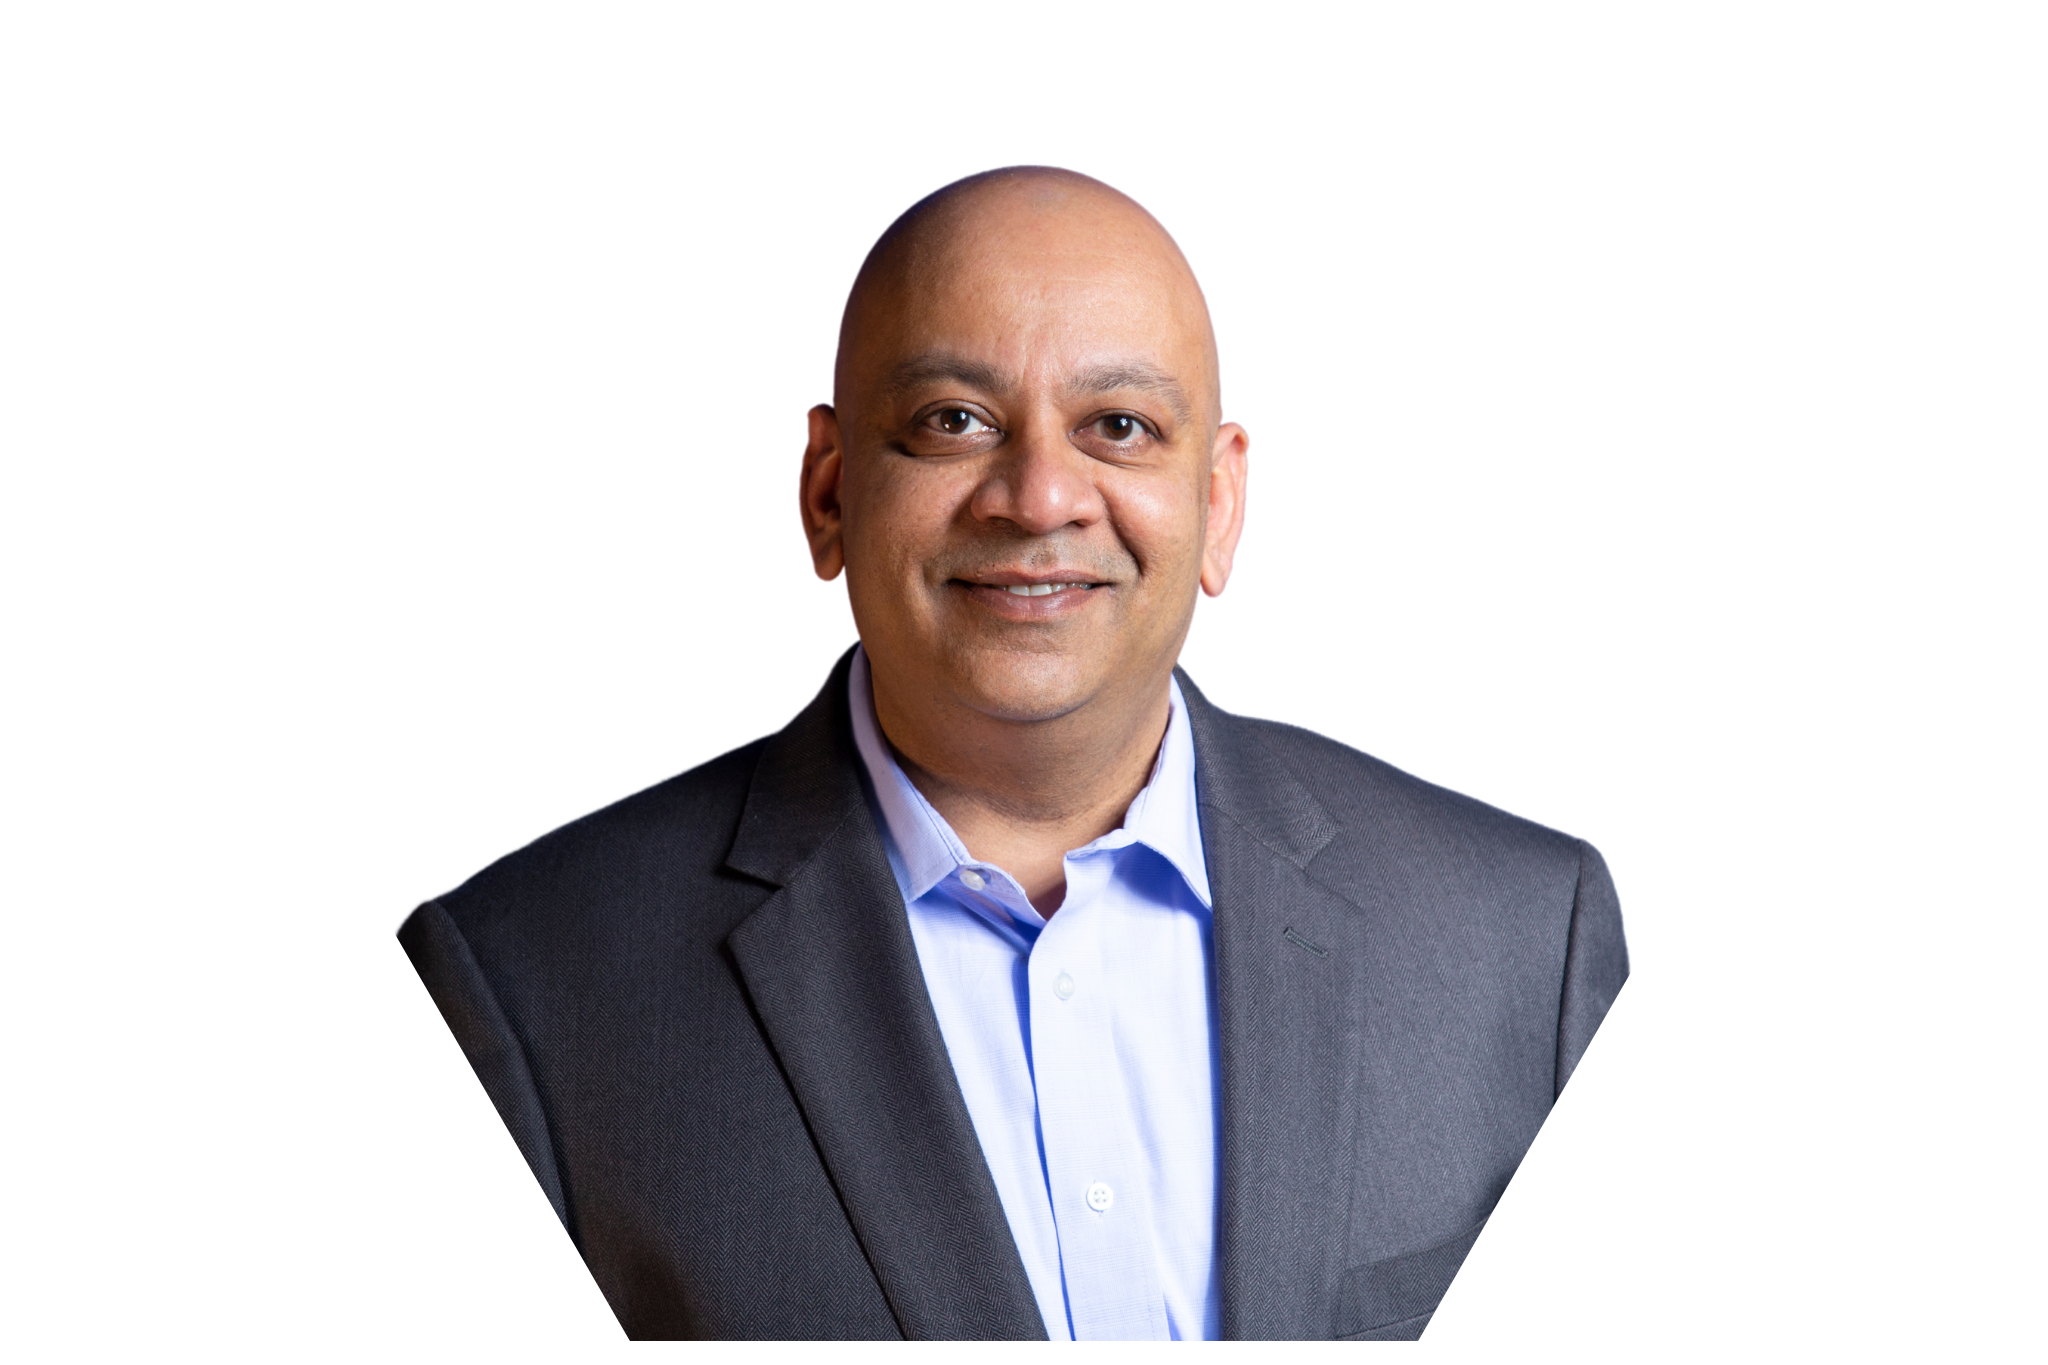 Kal Patel is the CTO of Decusoft